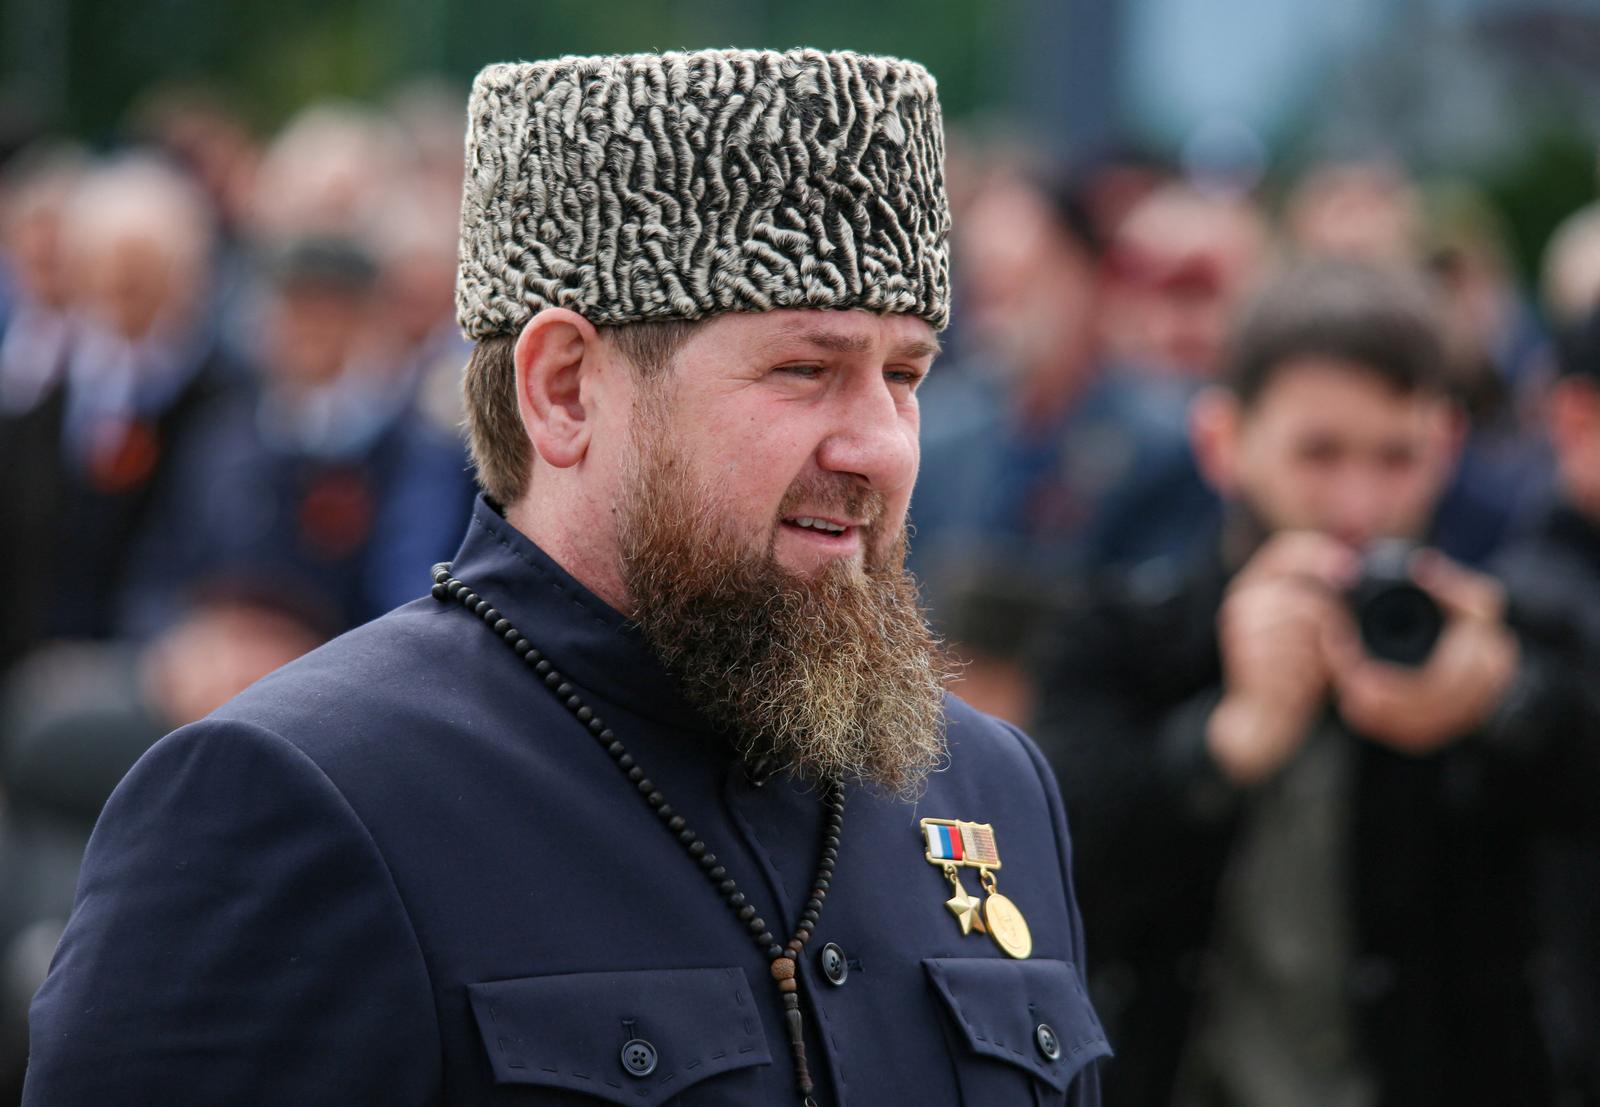 Head of the Chechen Republic Ramzan Kadyrov attends a military parade on Victory Day, which marks the 77th anniversary of the victory over Nazi Germany in World War Two, in the Chechen capital Grozny, Russia May 9, 2022. REUTERS/Chingis Kondarov Photo: Chingis Kondarov/REUTERS